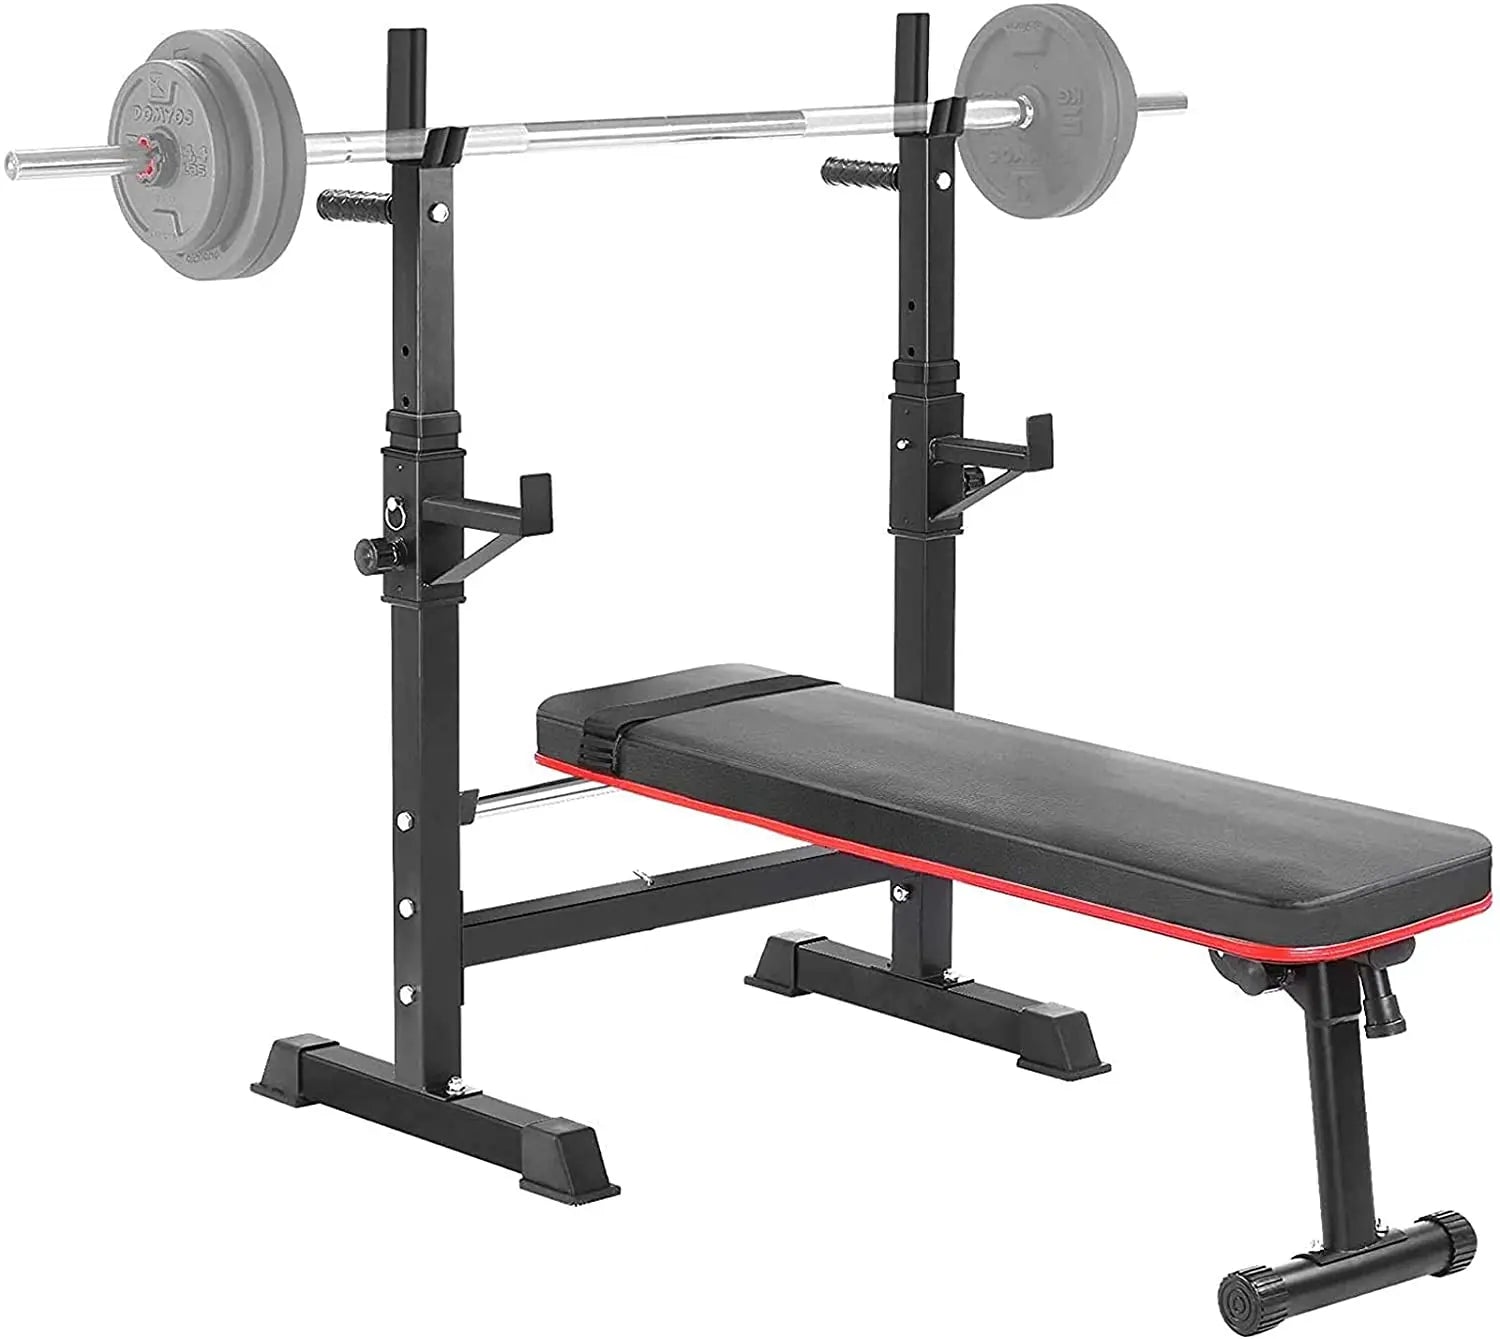 Multifunction Bench with Barbell Rack, Foldable, Workout Bench and Squat Rack Up To 200 Kg